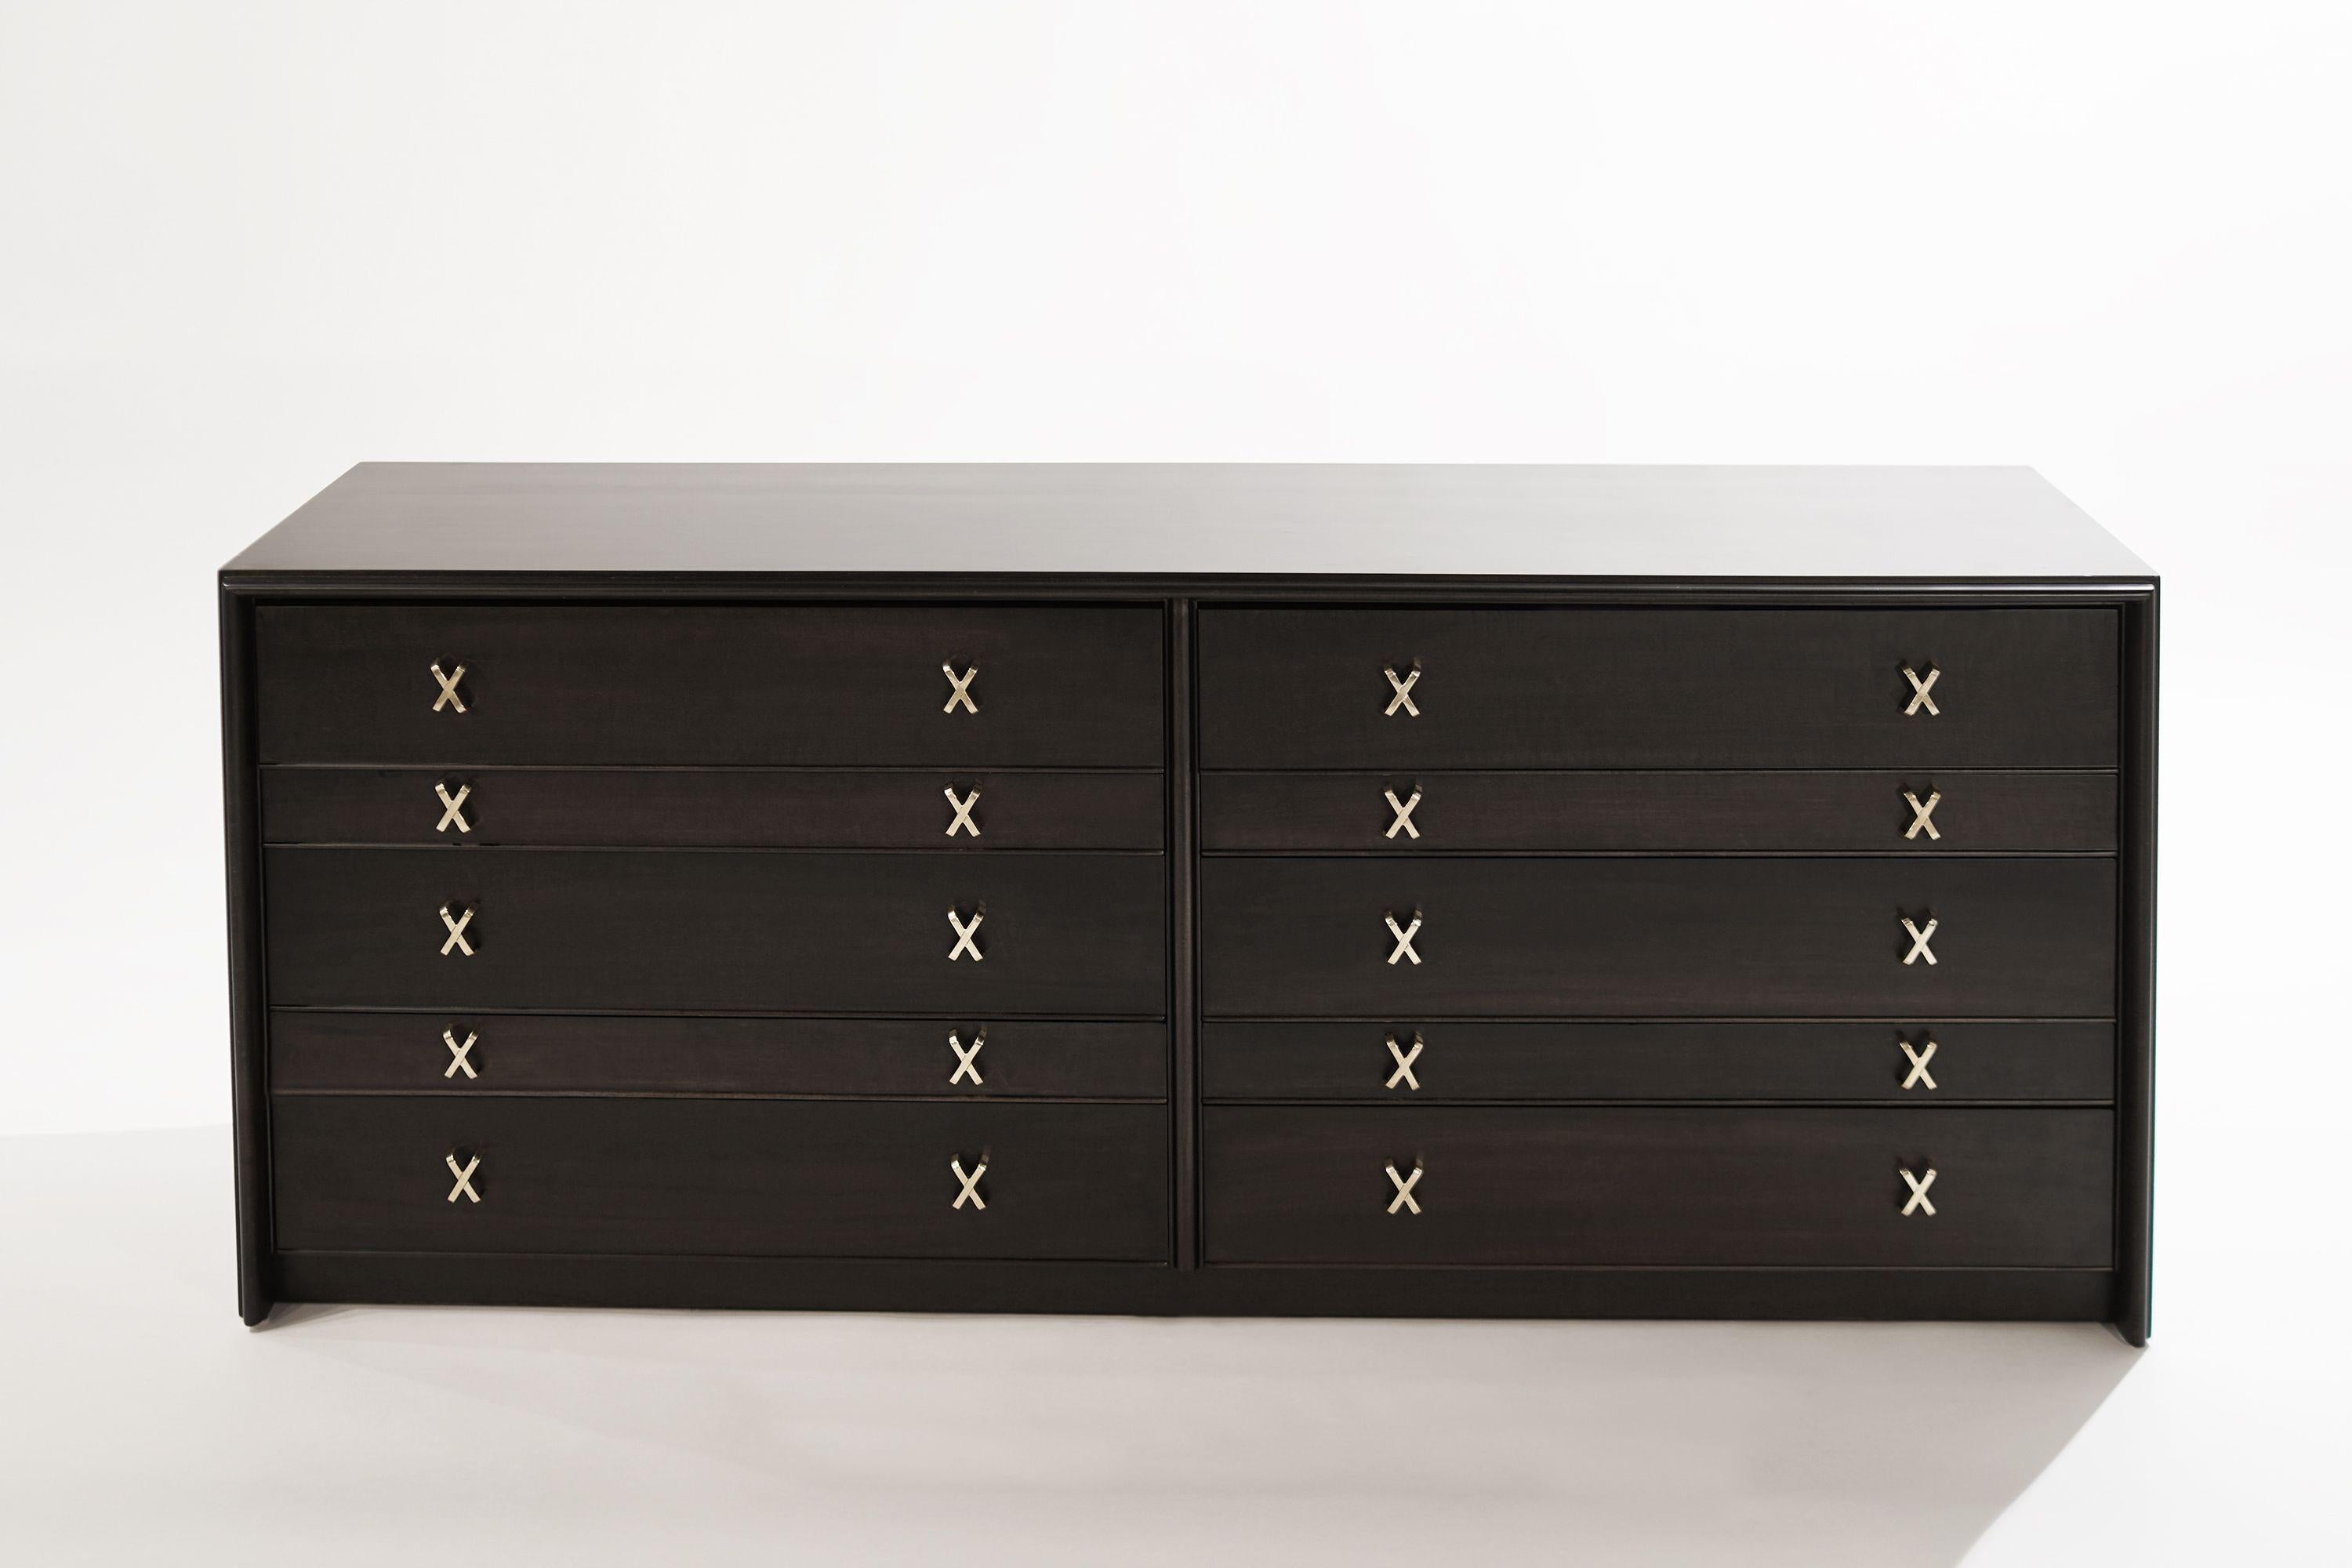 A beautiful double dresser that comprises ten drawers in varying depths, completely restored in an espresso finish, features brass X-Shaped hardware which has been hand-polished. Burned-mark by Johnson Furniture (manufacturer of the case) and a